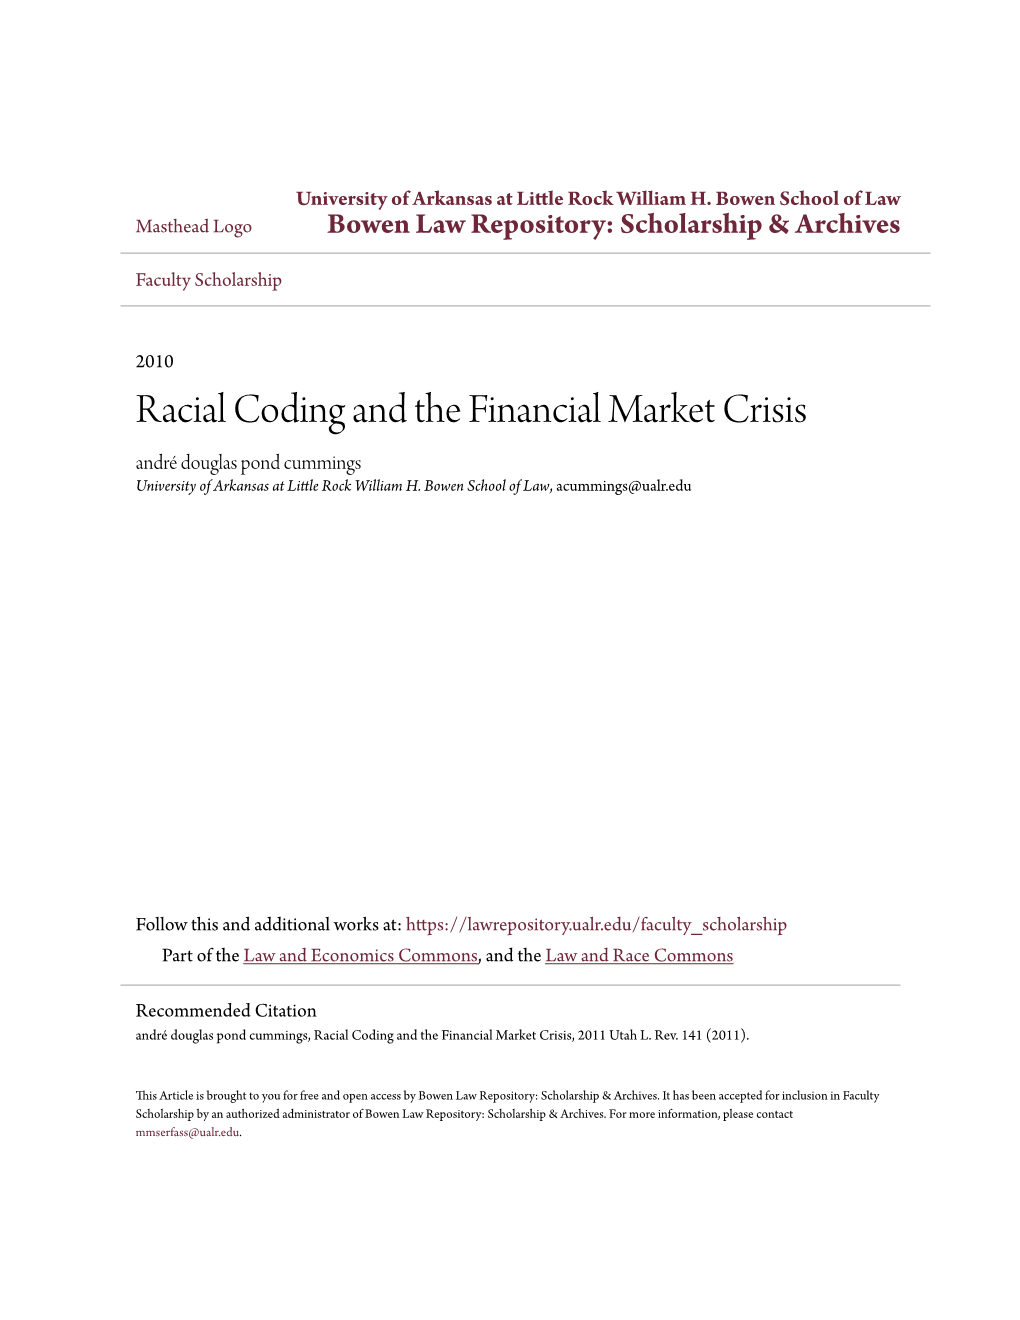 Racial Coding and the Financial Market Crisis André Douglas Pond Cummings University of Arkansas at Little Rock William H